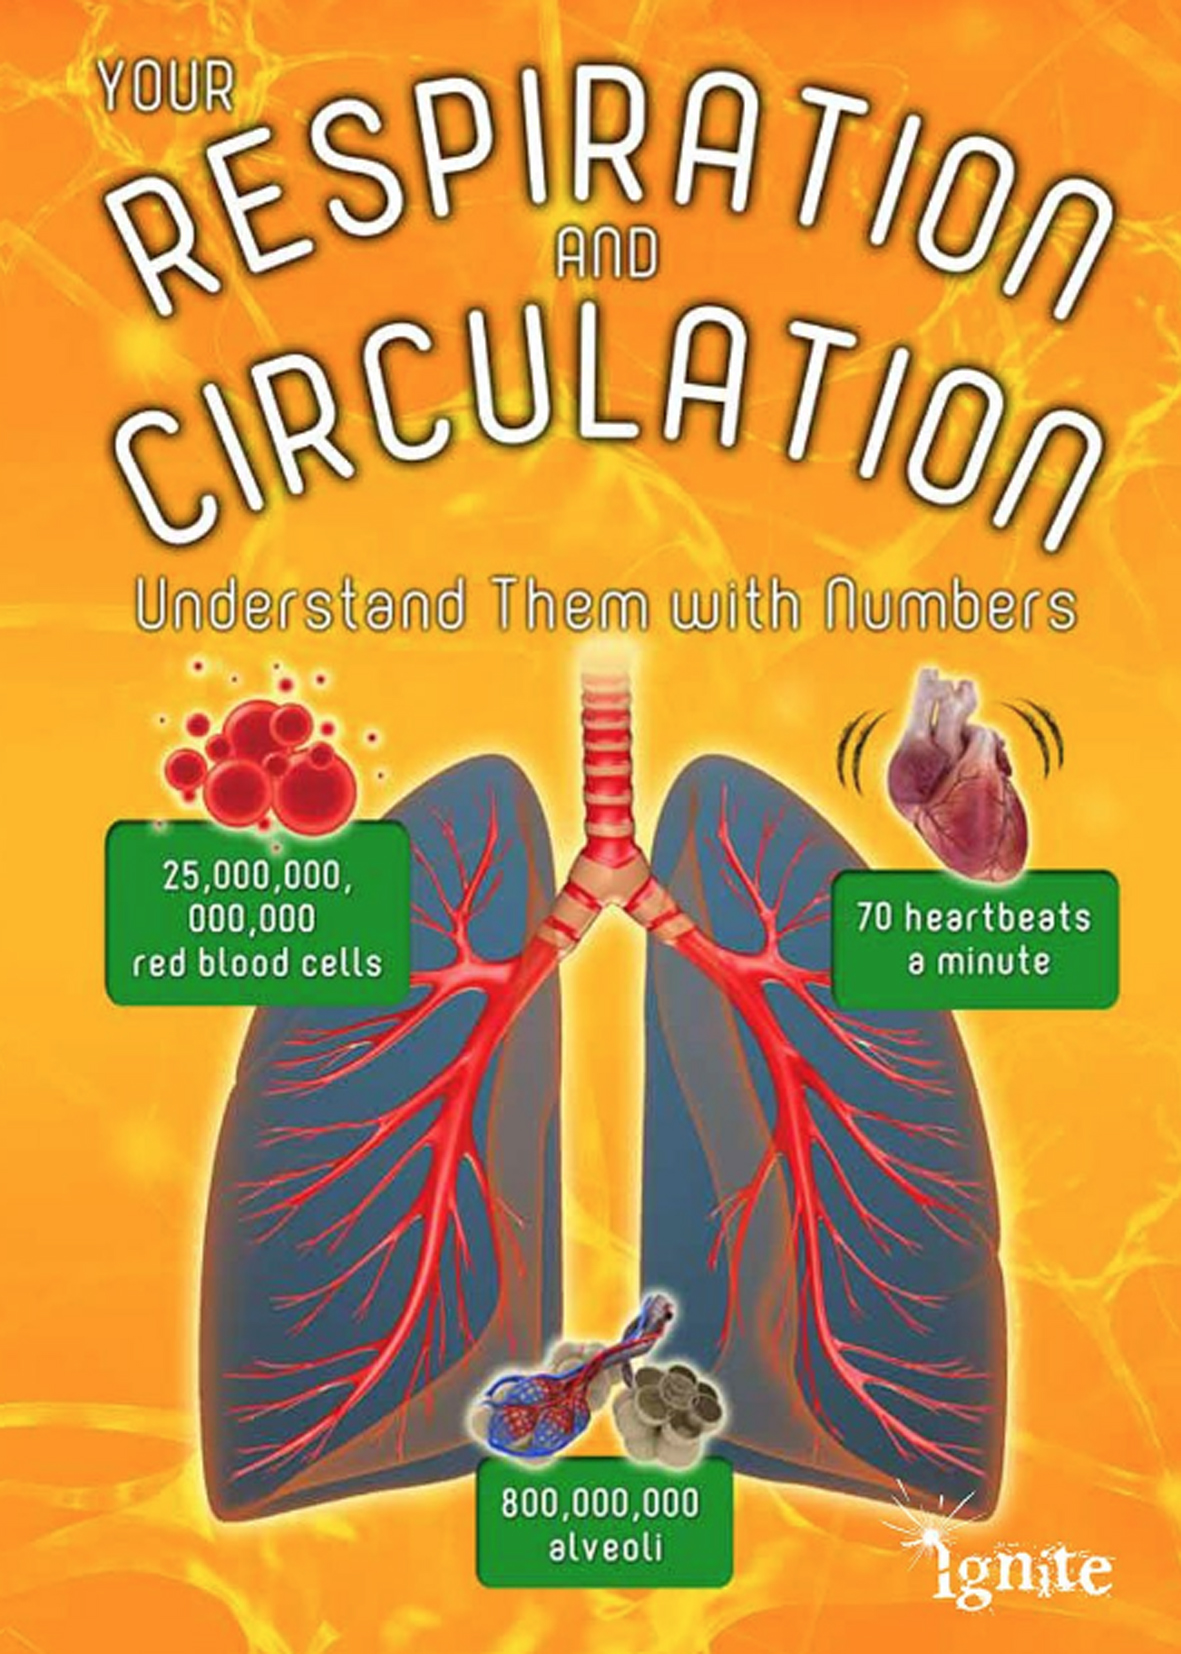 YOUR RESPIRATION AND CIRCULATION (Understand them with numbers) by DK Today